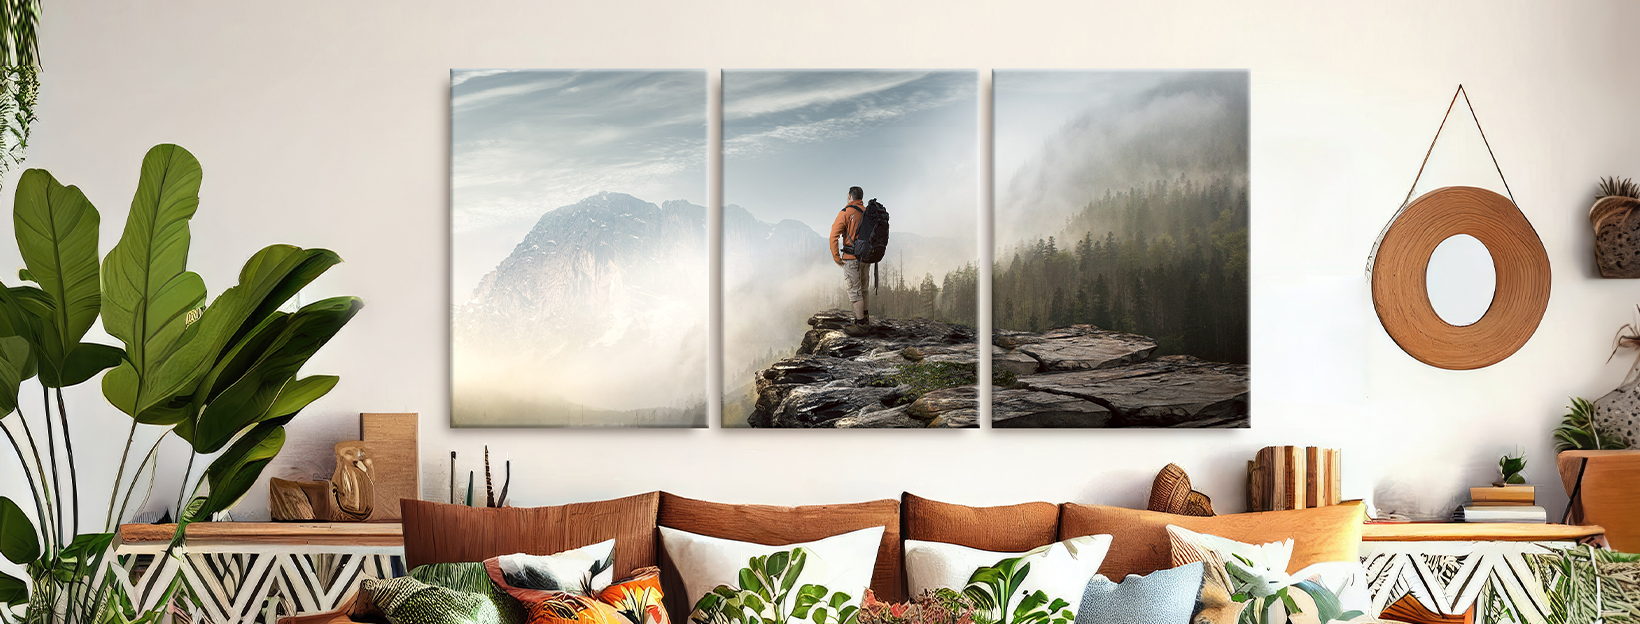 Epic Walls: 20 DIY Tips for Creating Gallery Walls with Custom Canvas Frames!